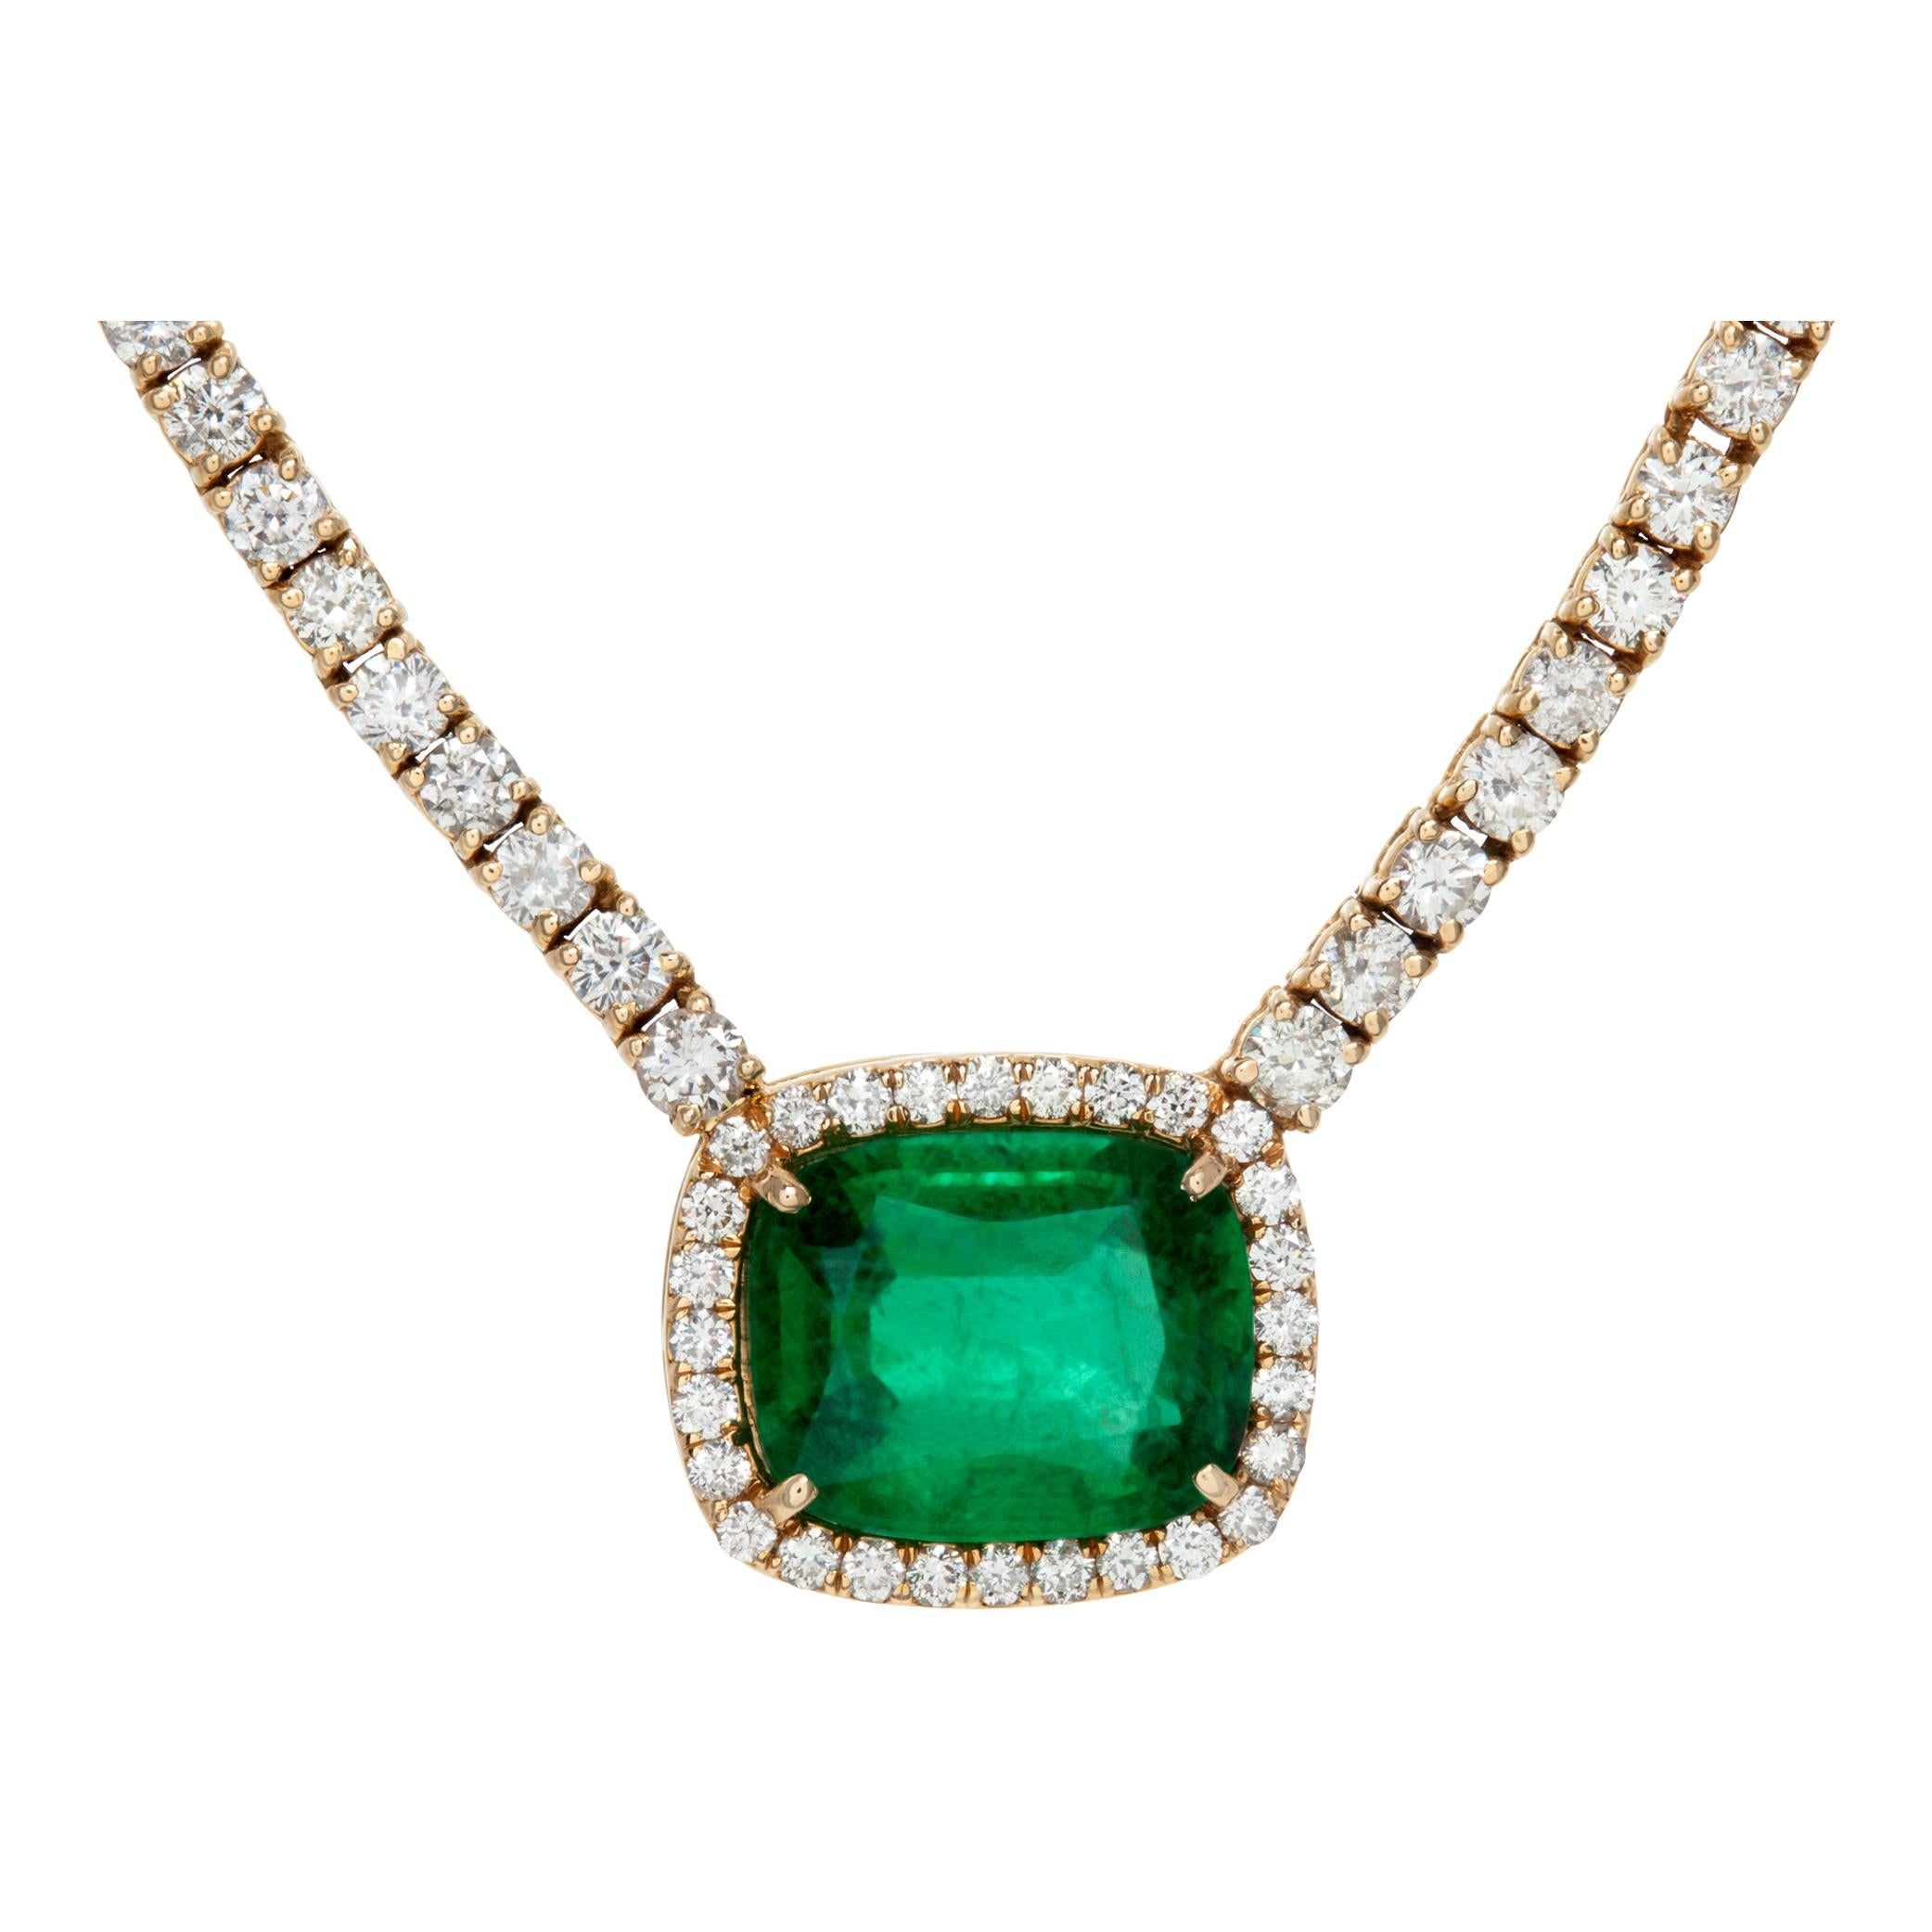 Rectangular cushion cut emerald & diamonds necklace in 18k yellow gold. Round brilliant cut diamonds total approx. weight over 6.00 carats, estimate G -H color, VS clarity. Brilliant cut emerald total approx. weight 5.00 carats. Length 17.5 inches,